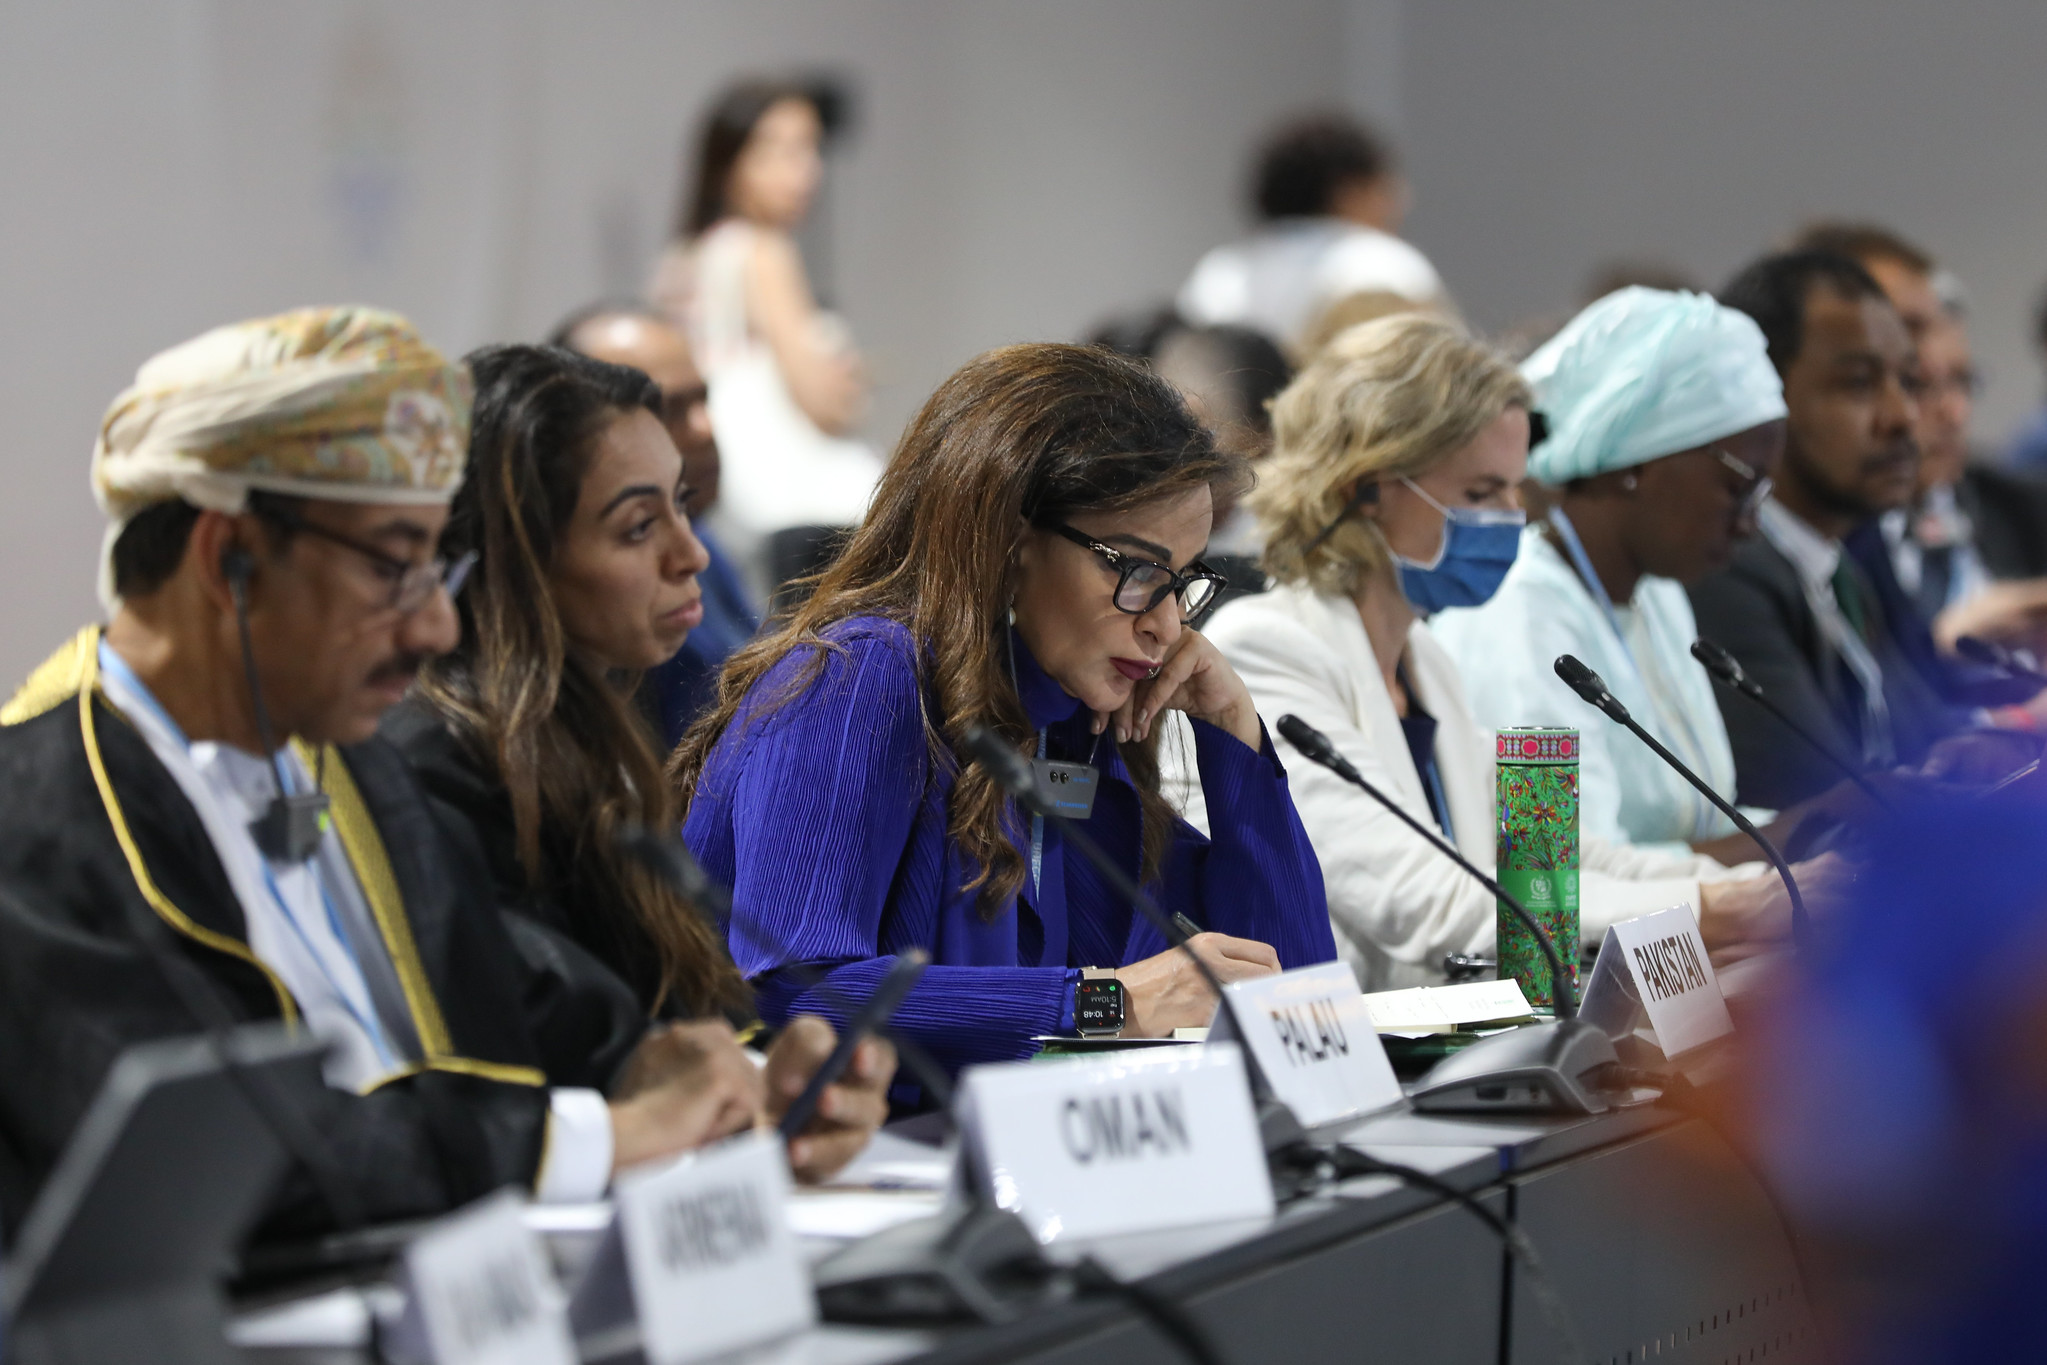 Pakistan's Climate Minister Sherry Rehman in a meeting during COP27